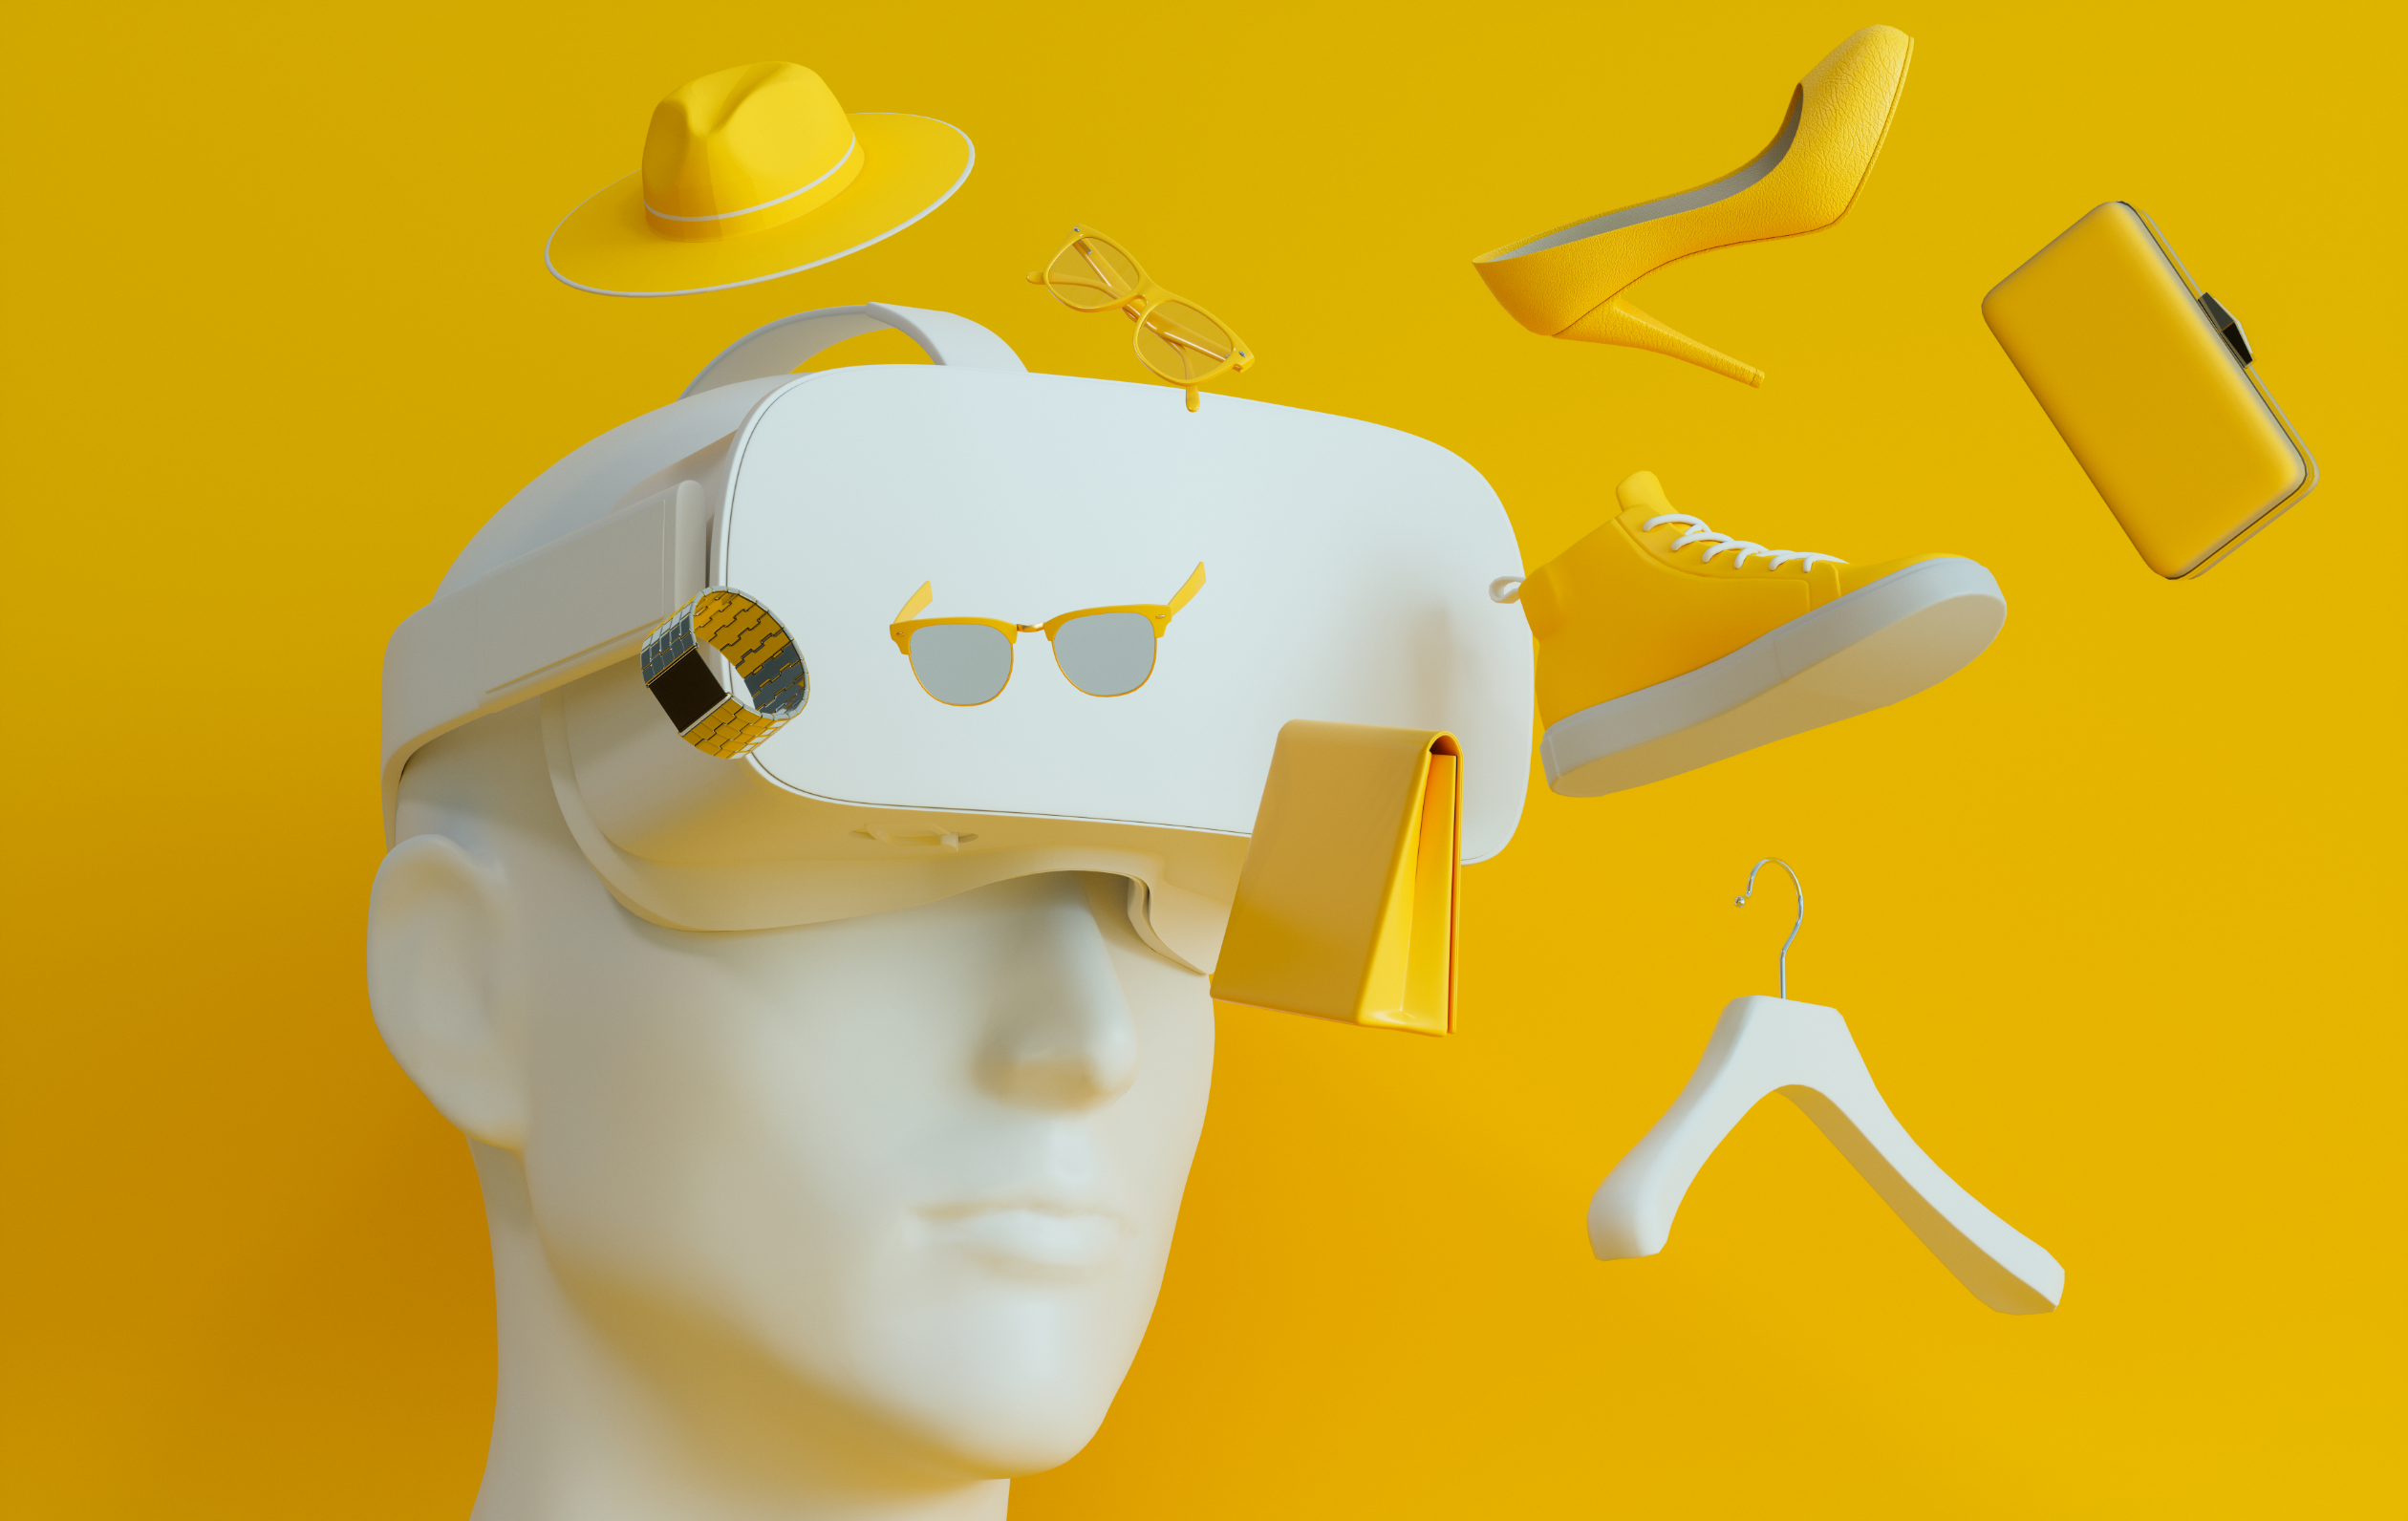 A stylized collage of futuristic ecommerce trends - man in VR goggles surrounded by images of products.